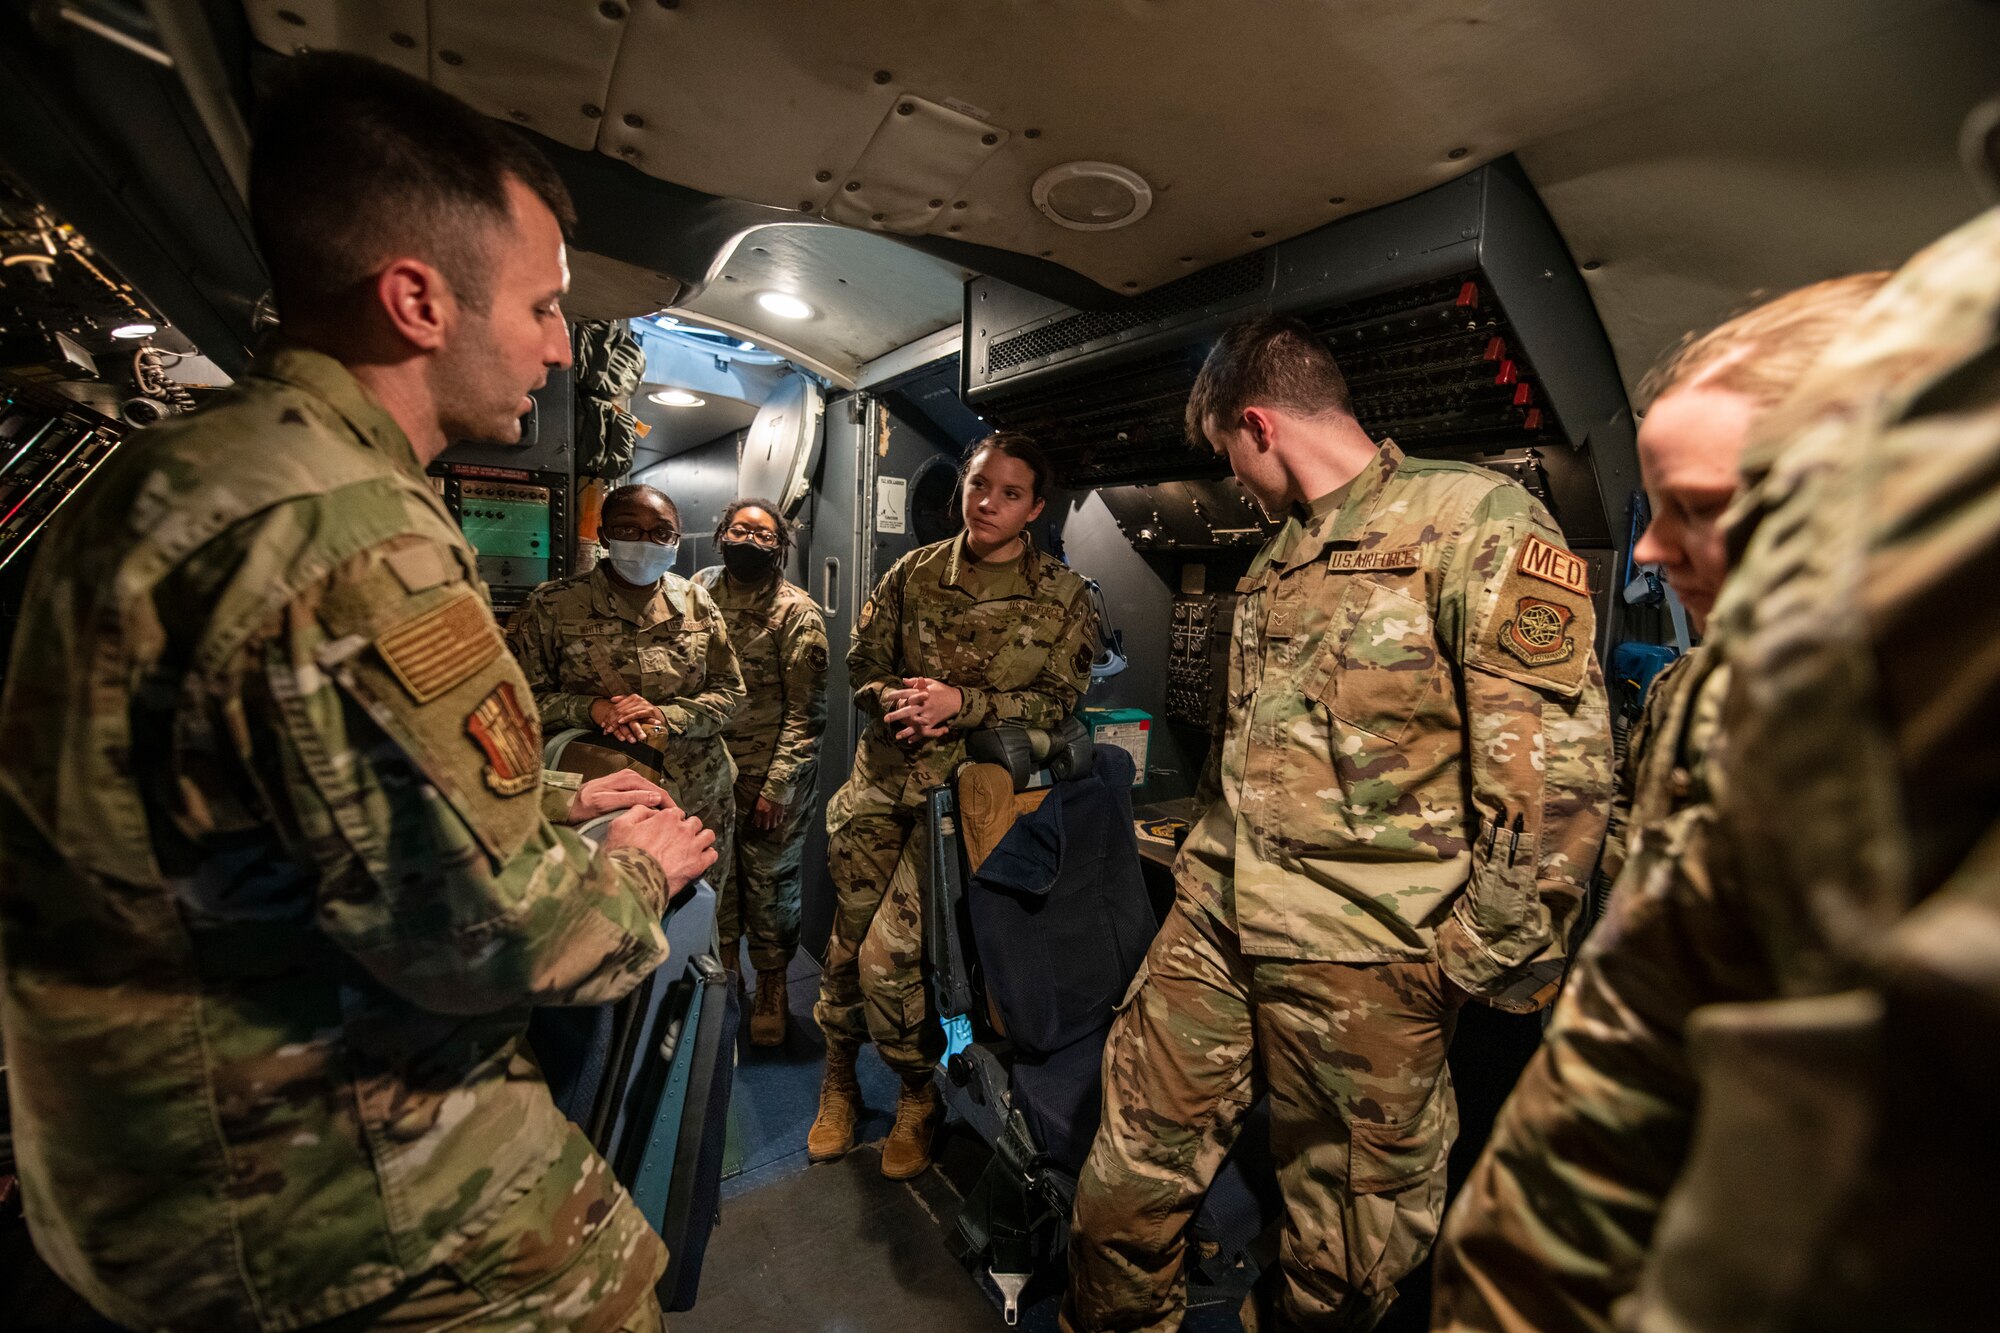 Airmen stand around in a circle inside of a cockpit of a large military aircraft.